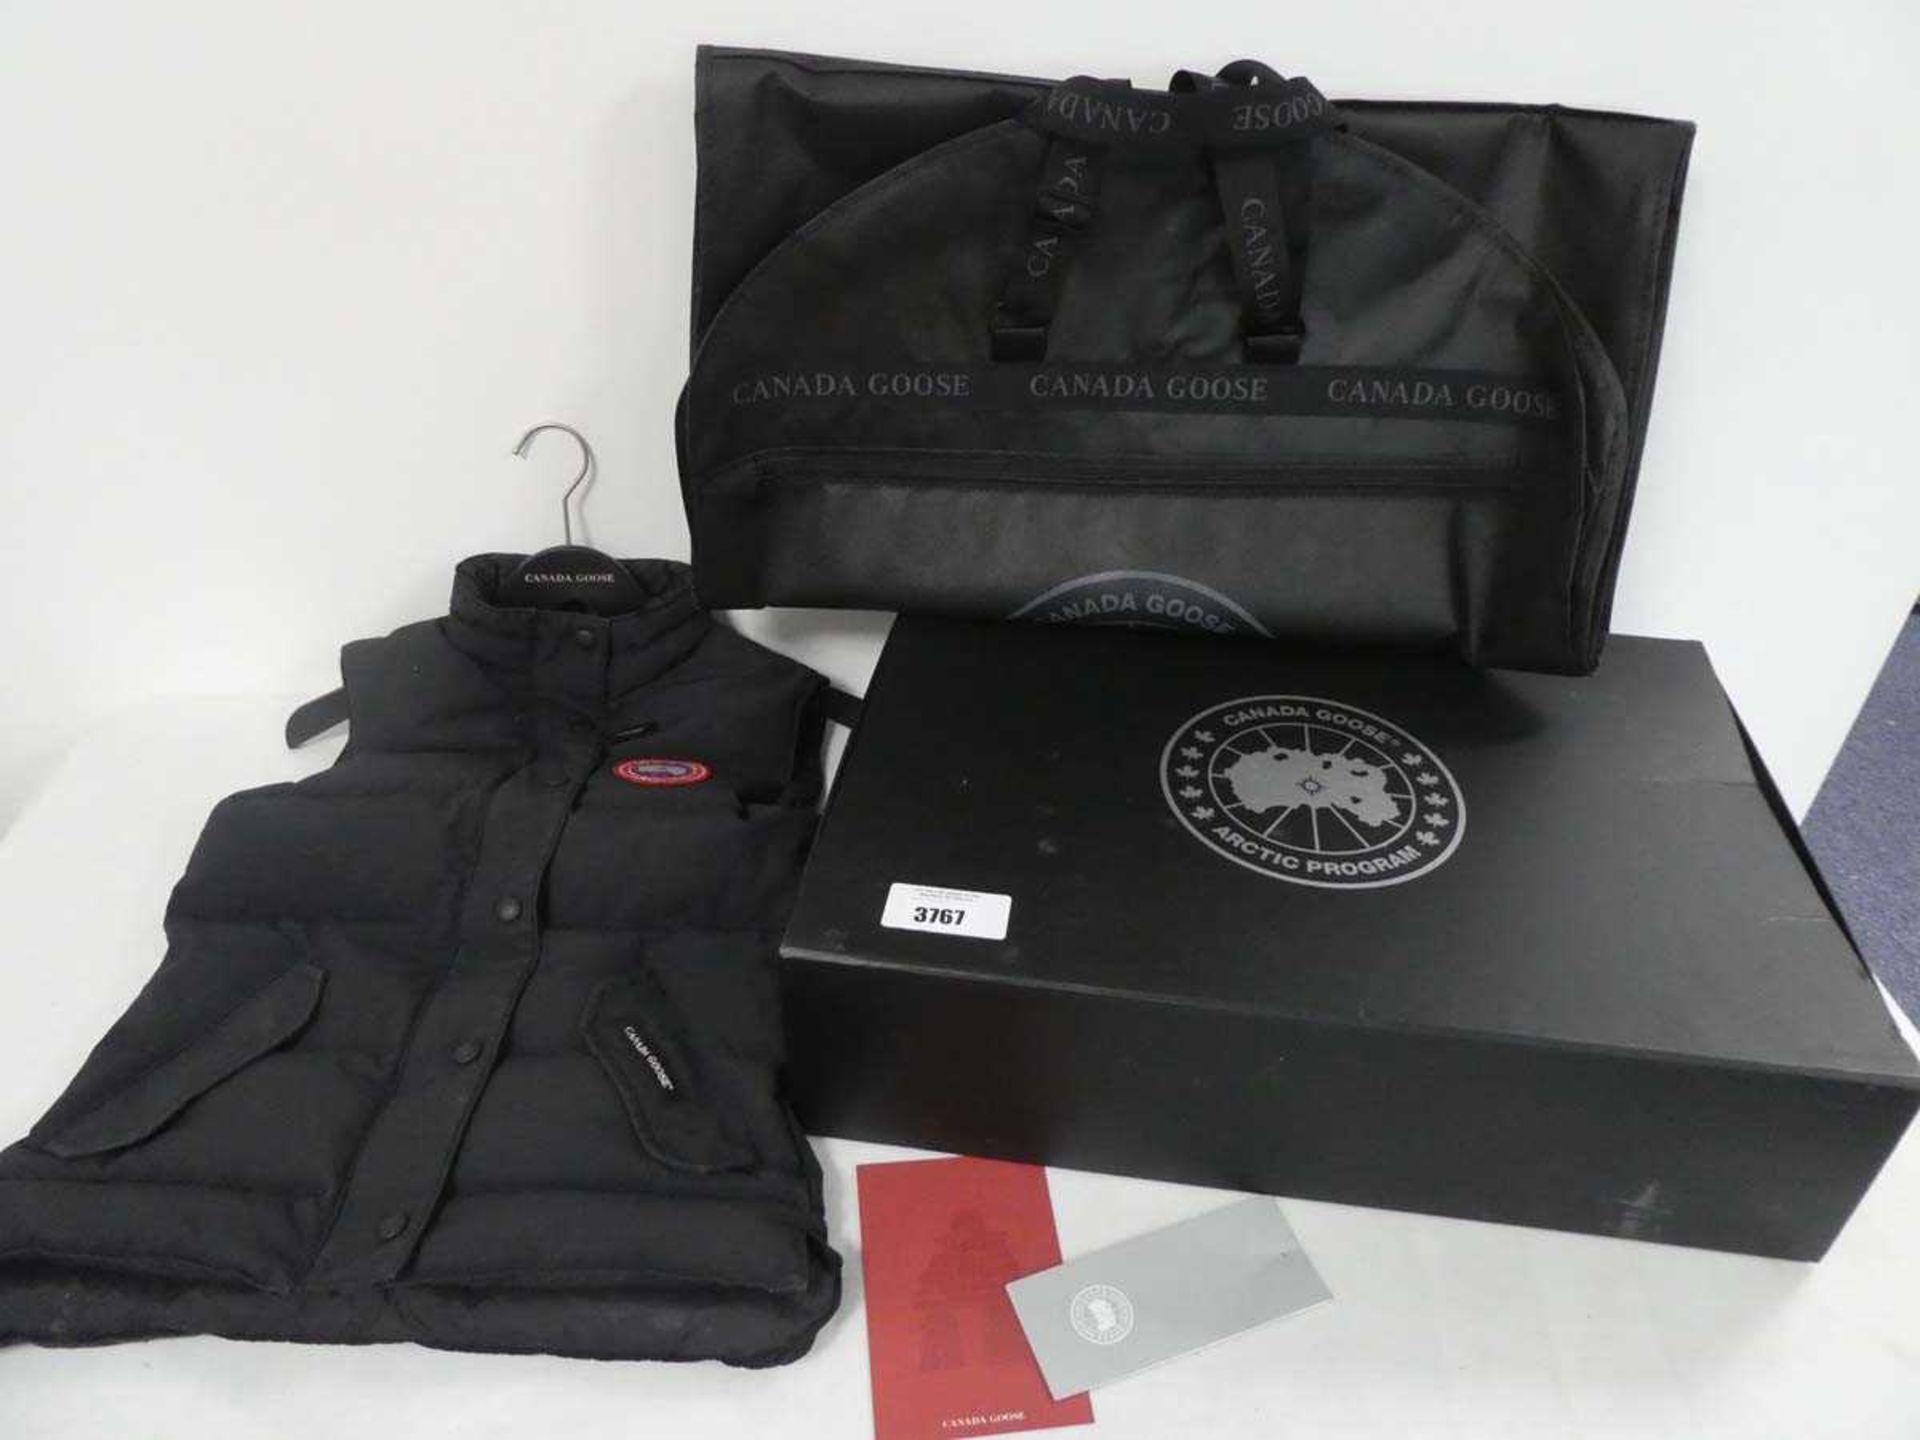 +VAT Canada Goose ladies gilet jacket in black size 2XS with box, hanger and garment bag (some signs